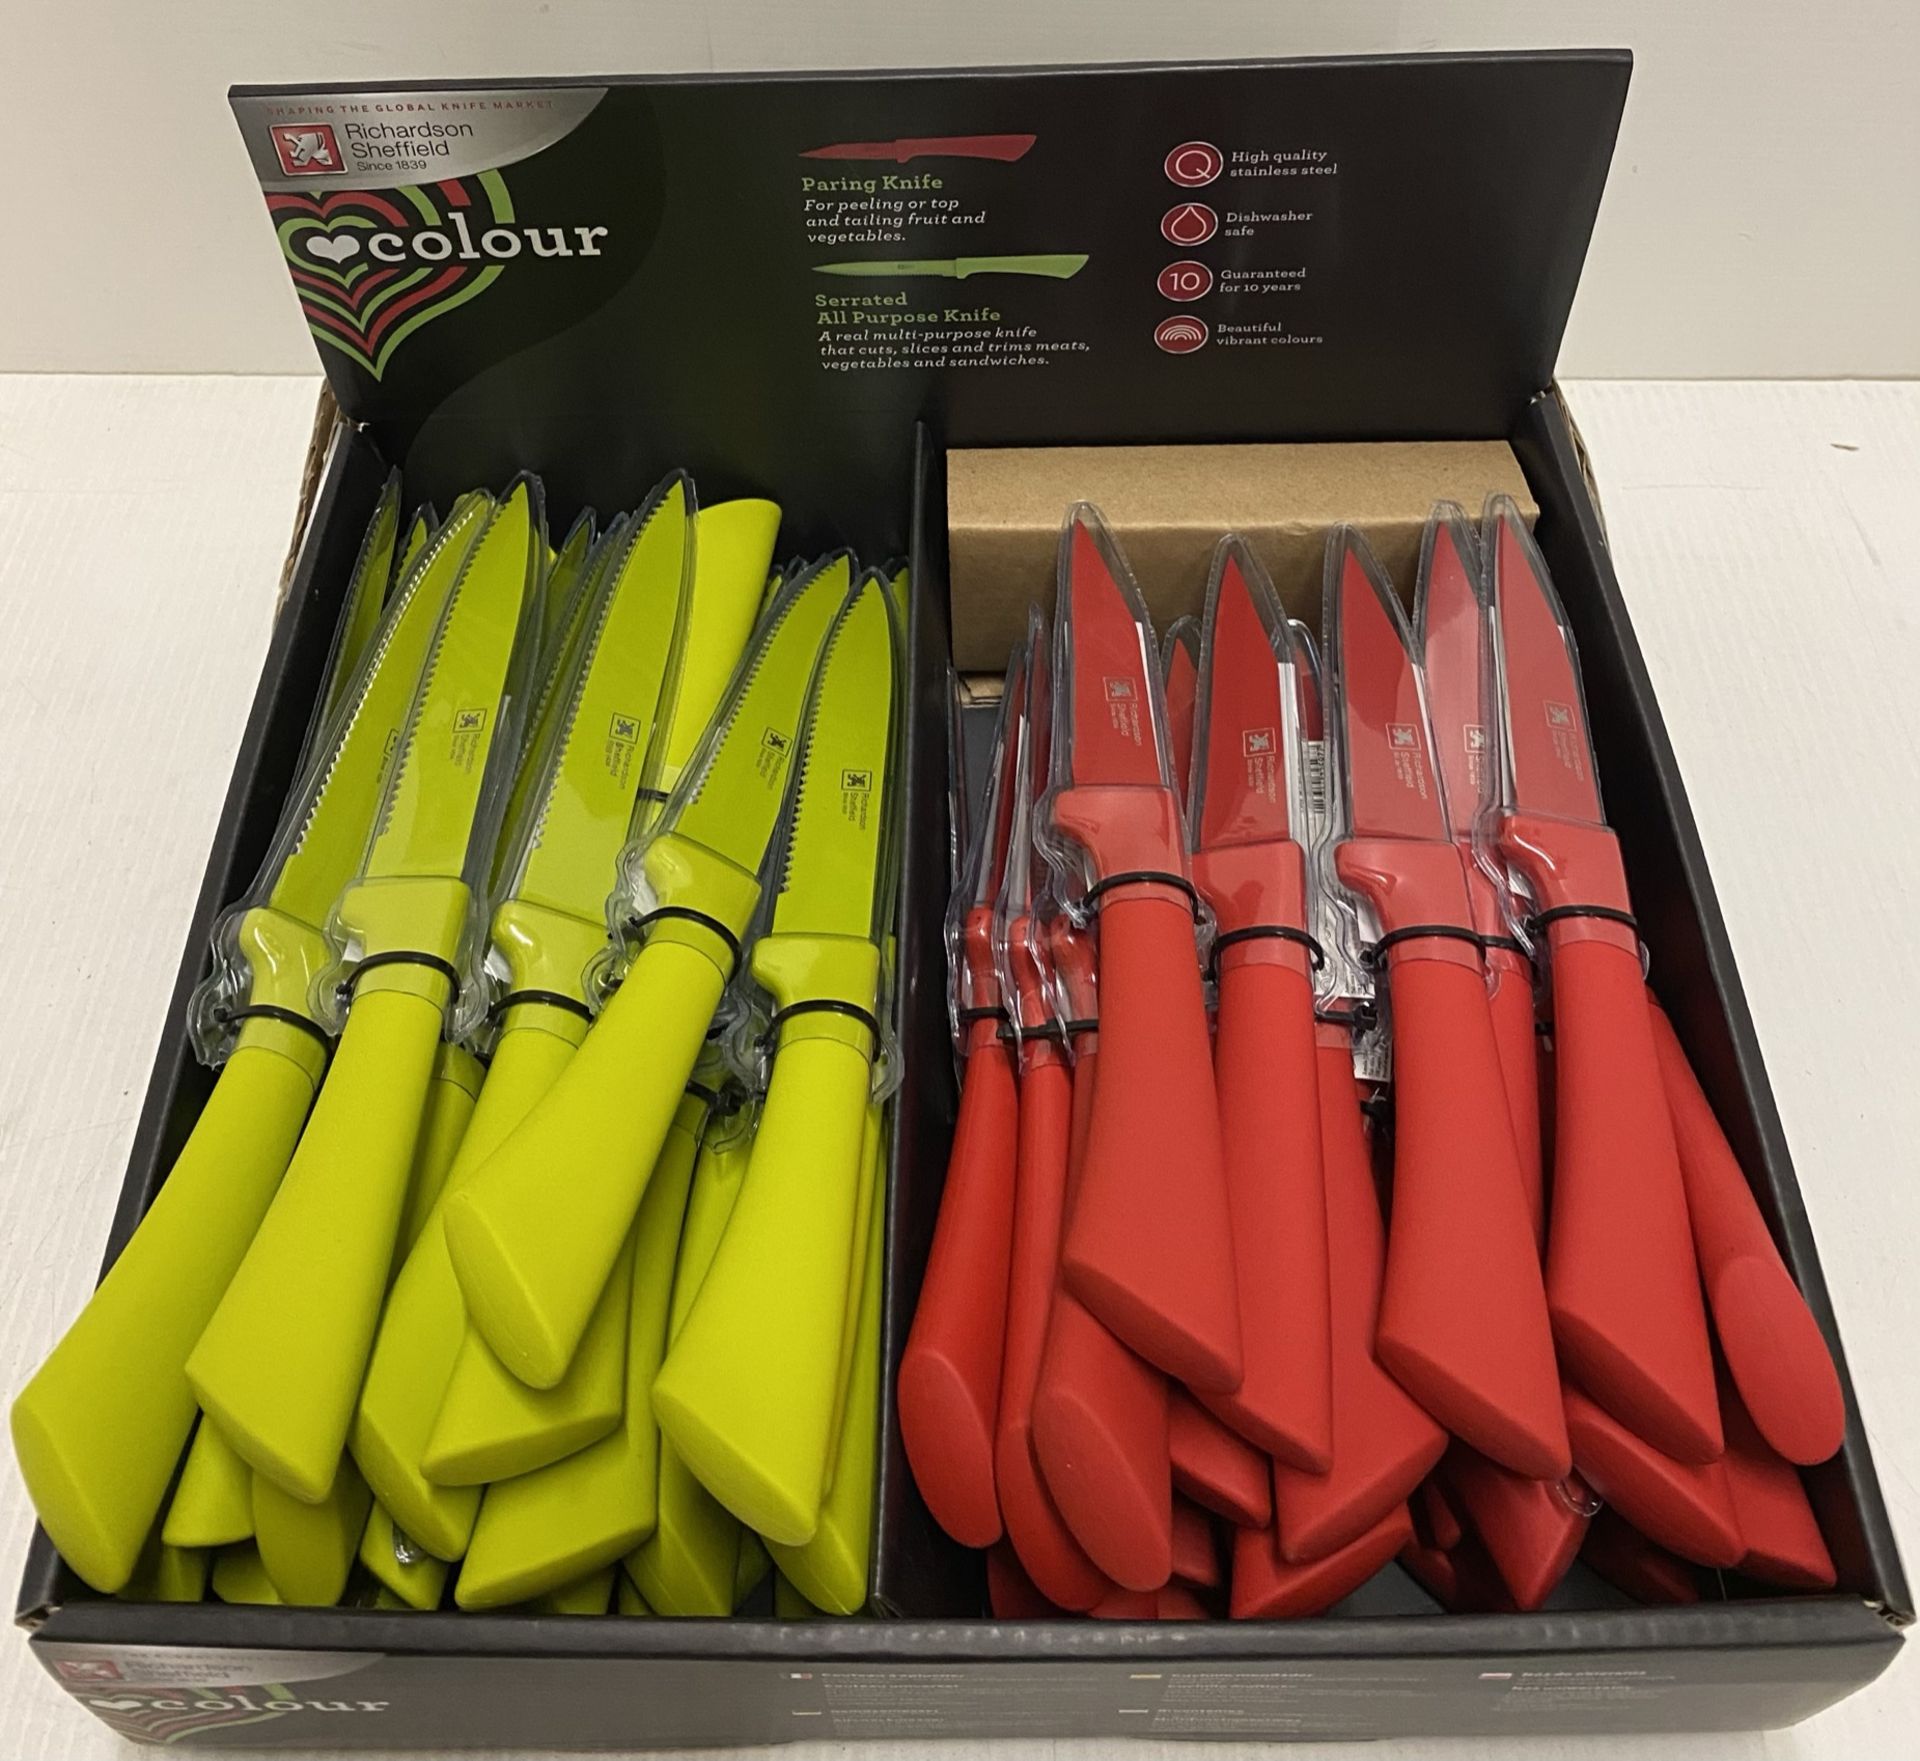 34 x assorted Richardson Sheffield Colour serrated or purpose and paring knives - RRP £8.